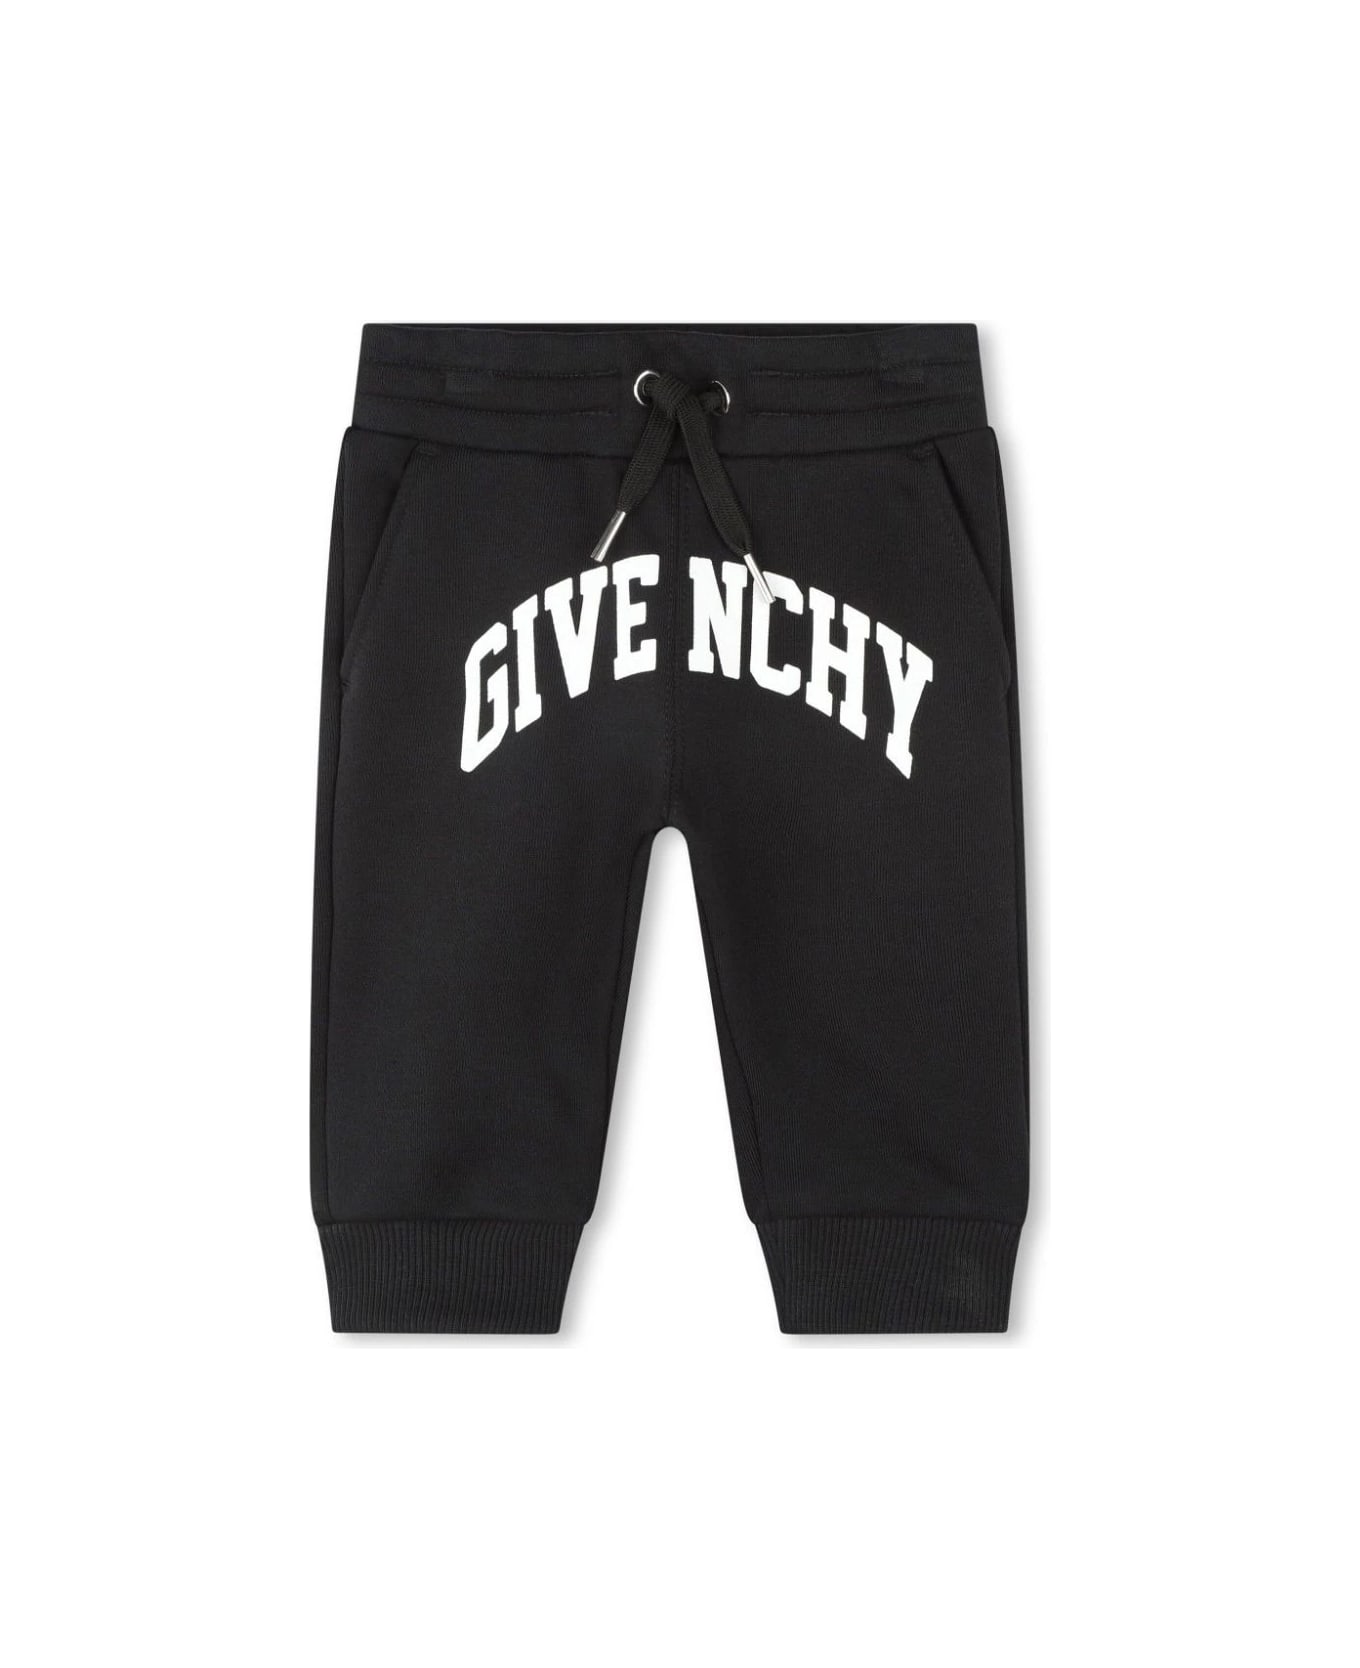 Givenchy Printed Sports Trousers - Black